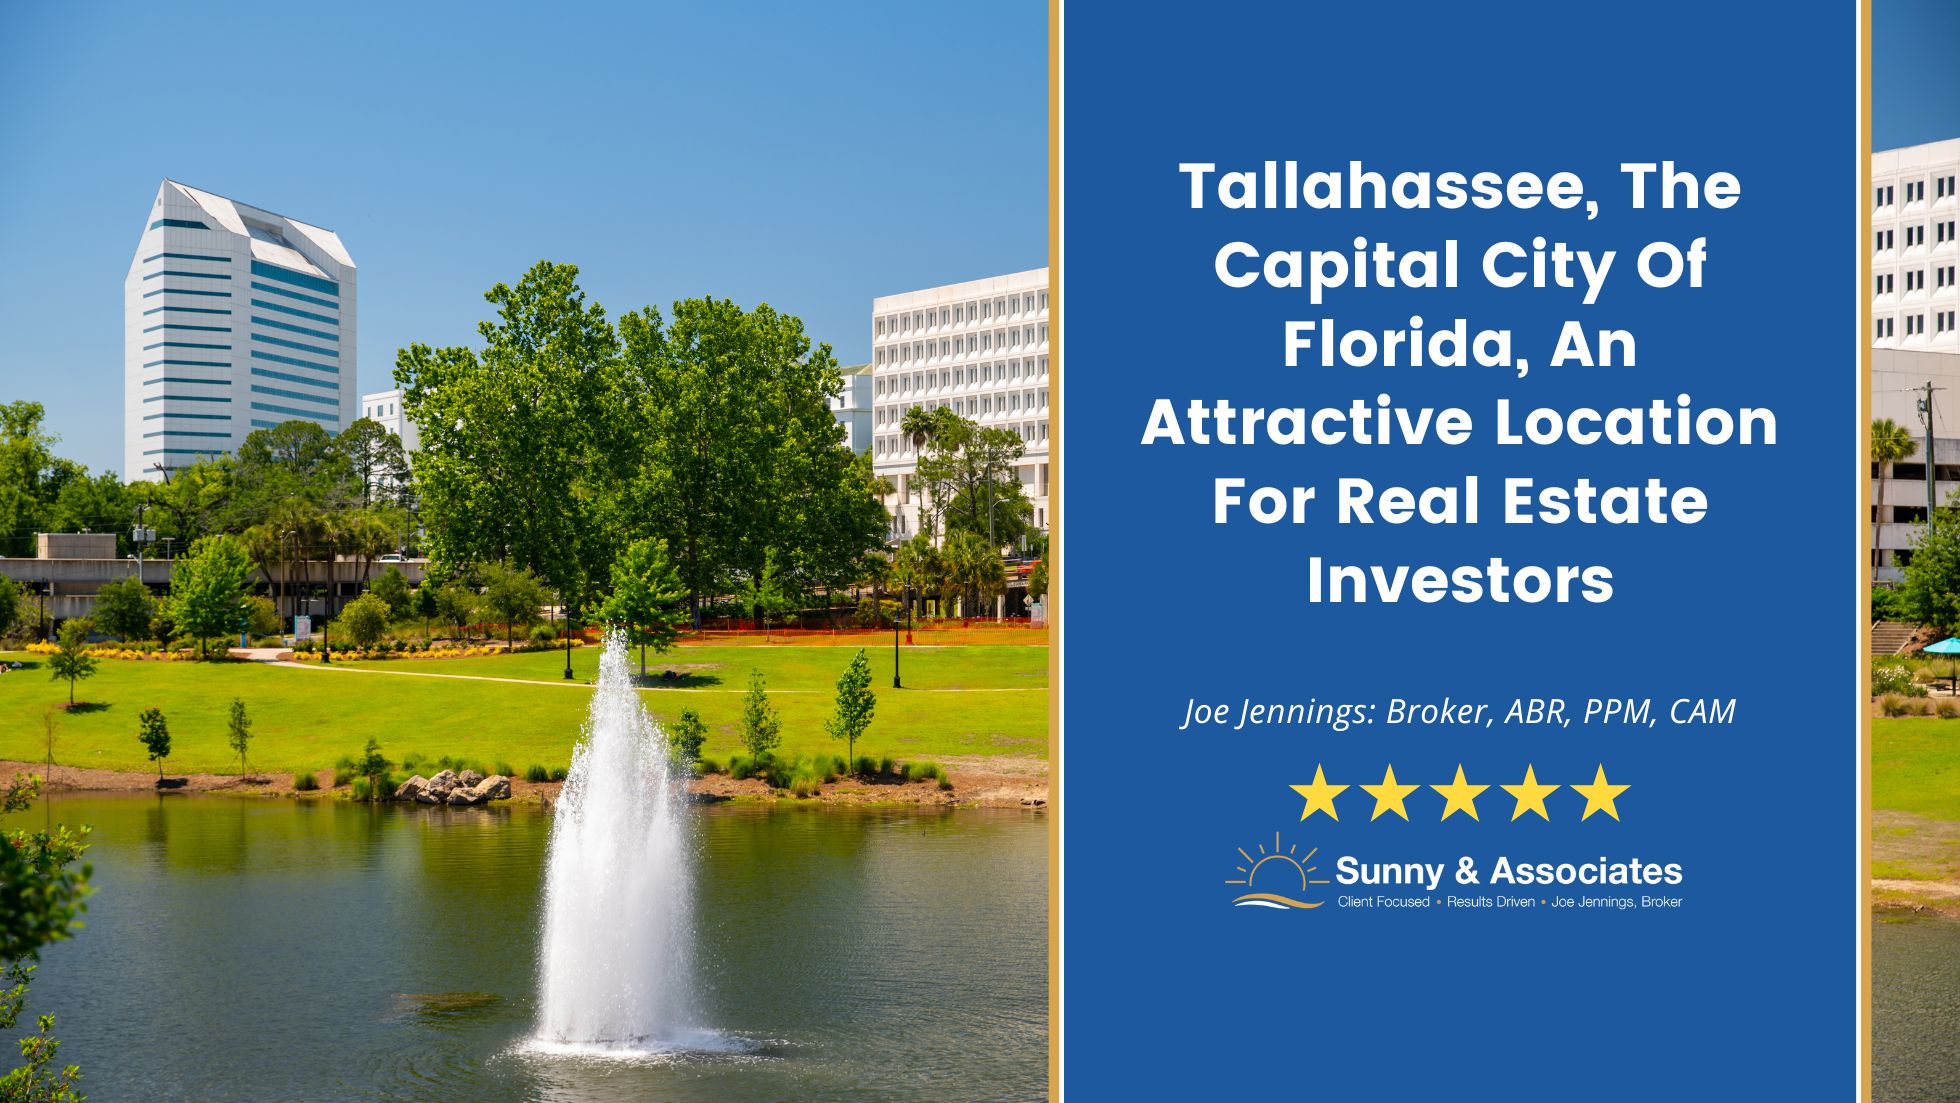 tallahassee-the-capital-city-of-florida-an-attractive-location-for-real-estate-investors